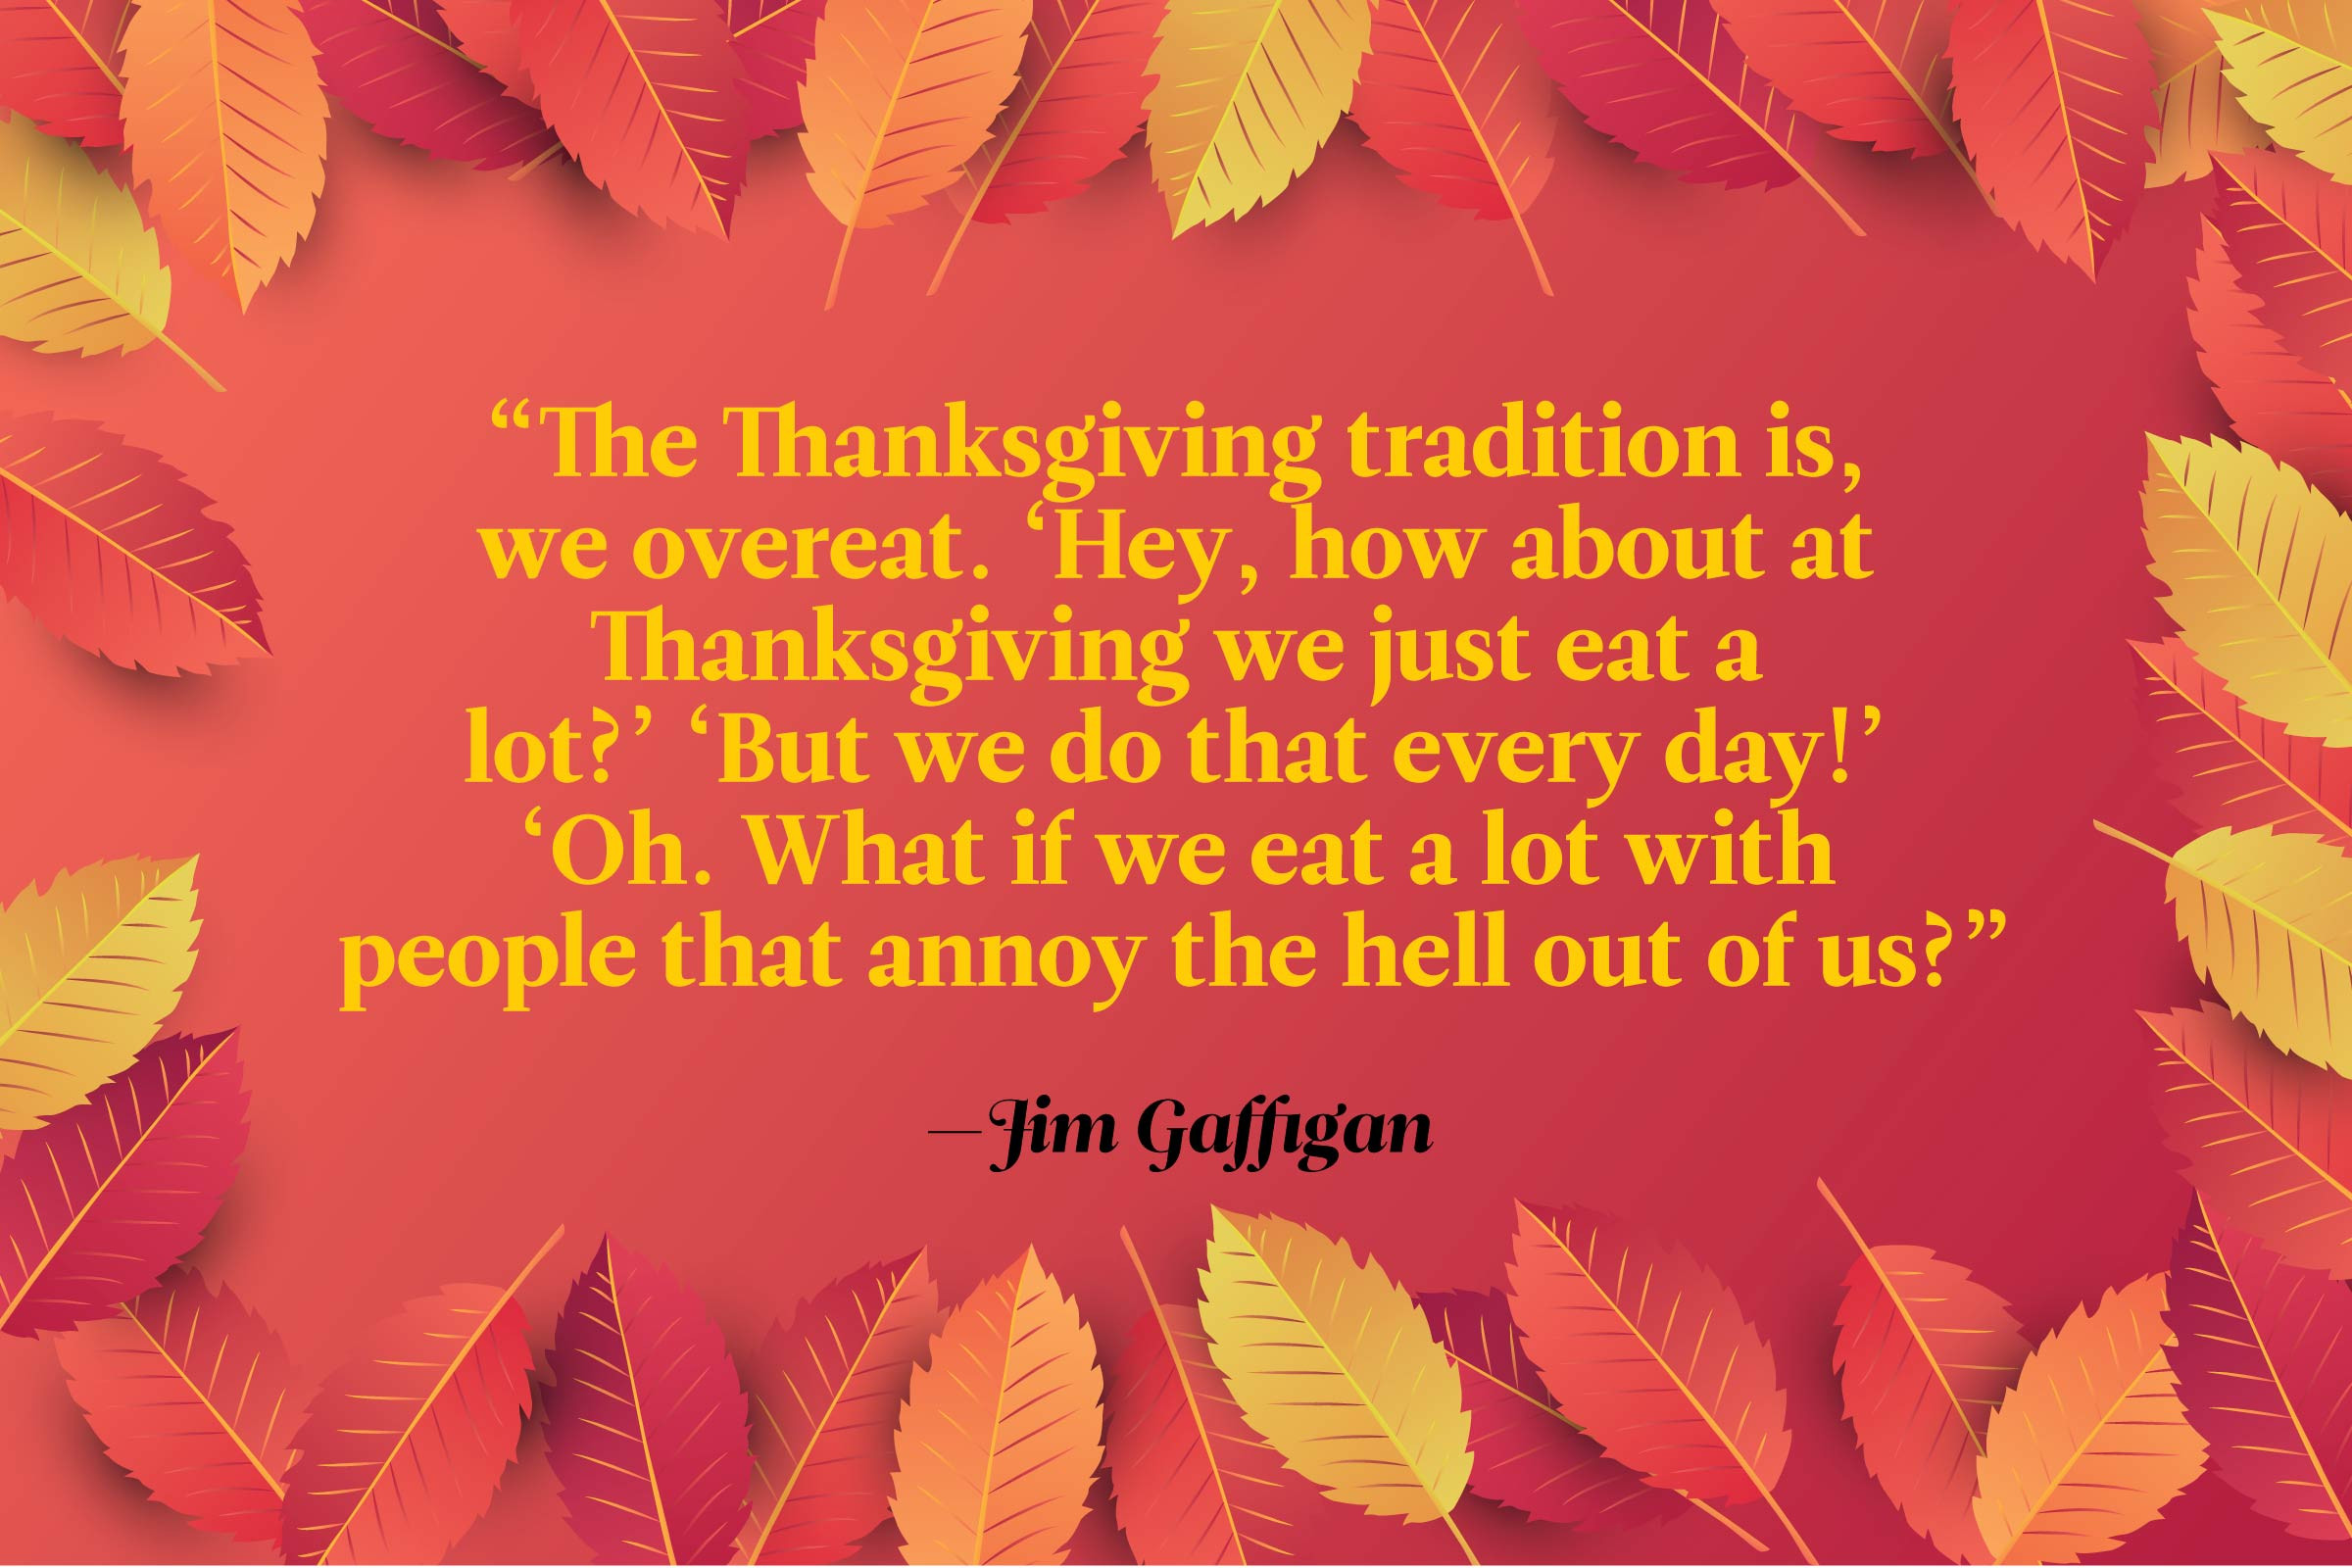 Funny Thanksgiving Quotes Photos
 Funny Thanksgiving Quotes to at the Table